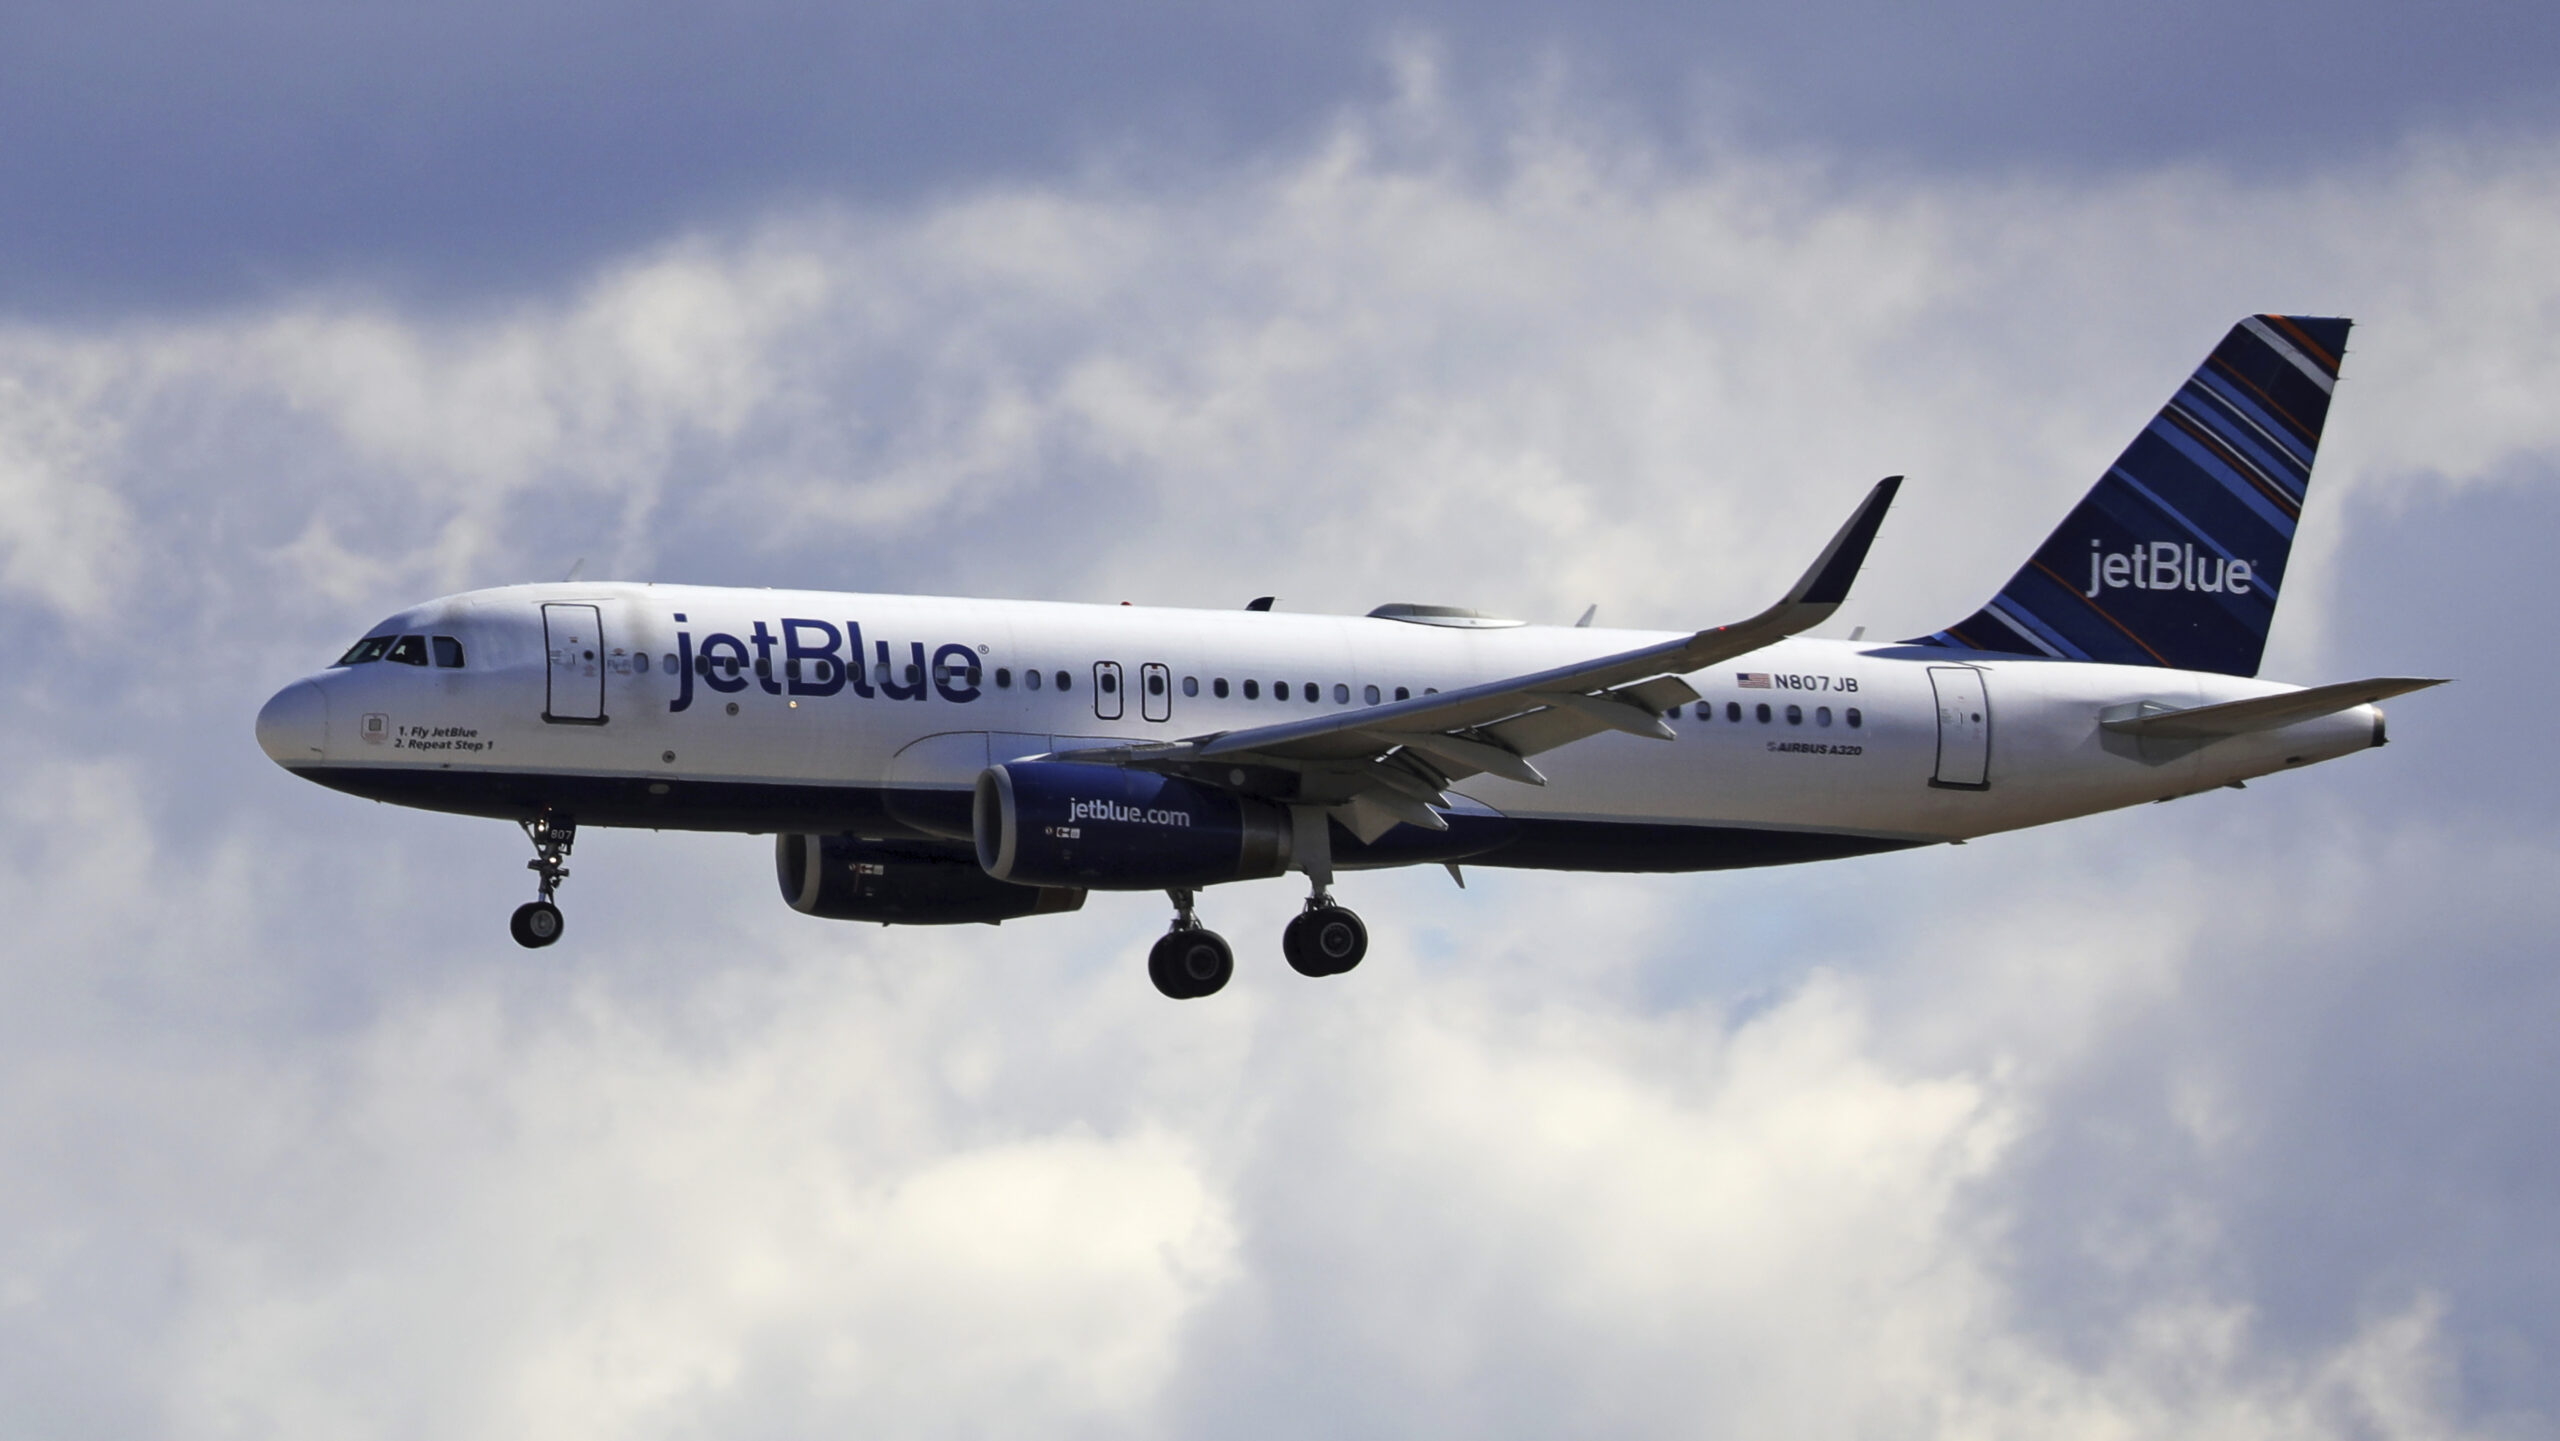 jetblue-offers-flights-to-us-cities-and-islands-this-week-starting-at-$64